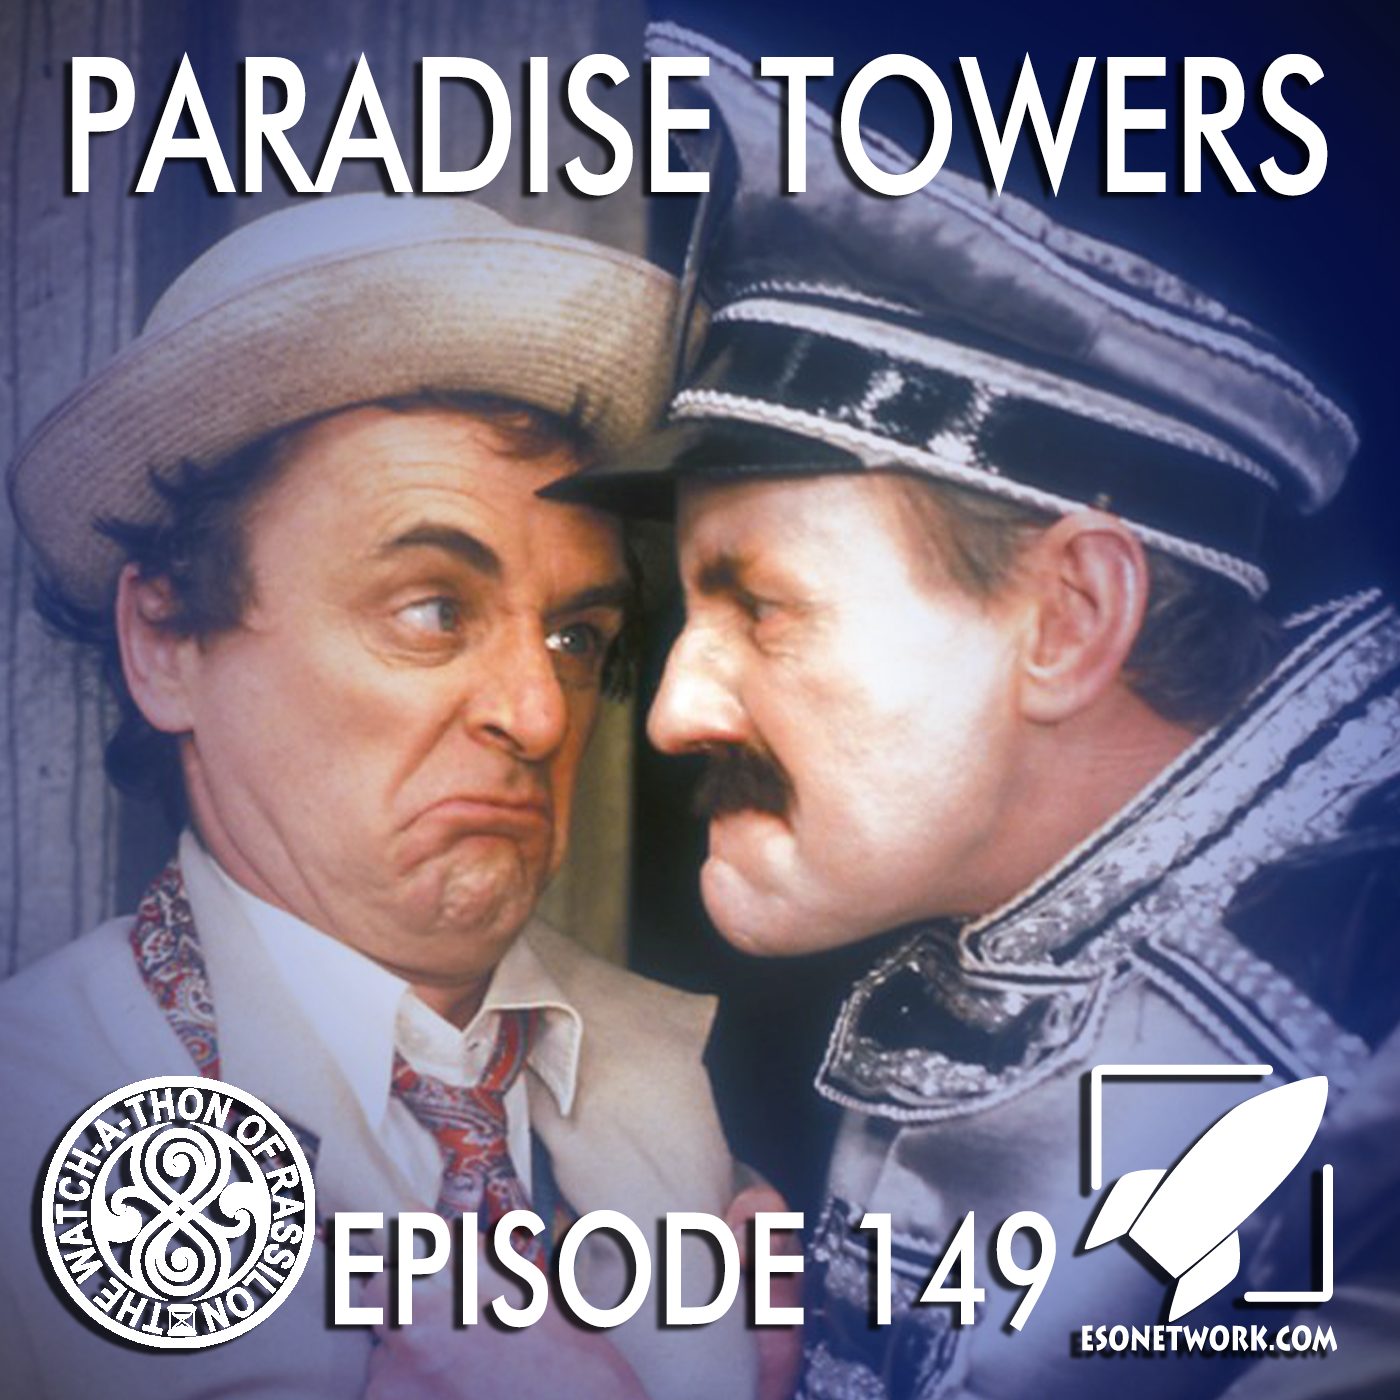 The Watch-A-Thon of Rassilon: Episode 149: Paradise Towers